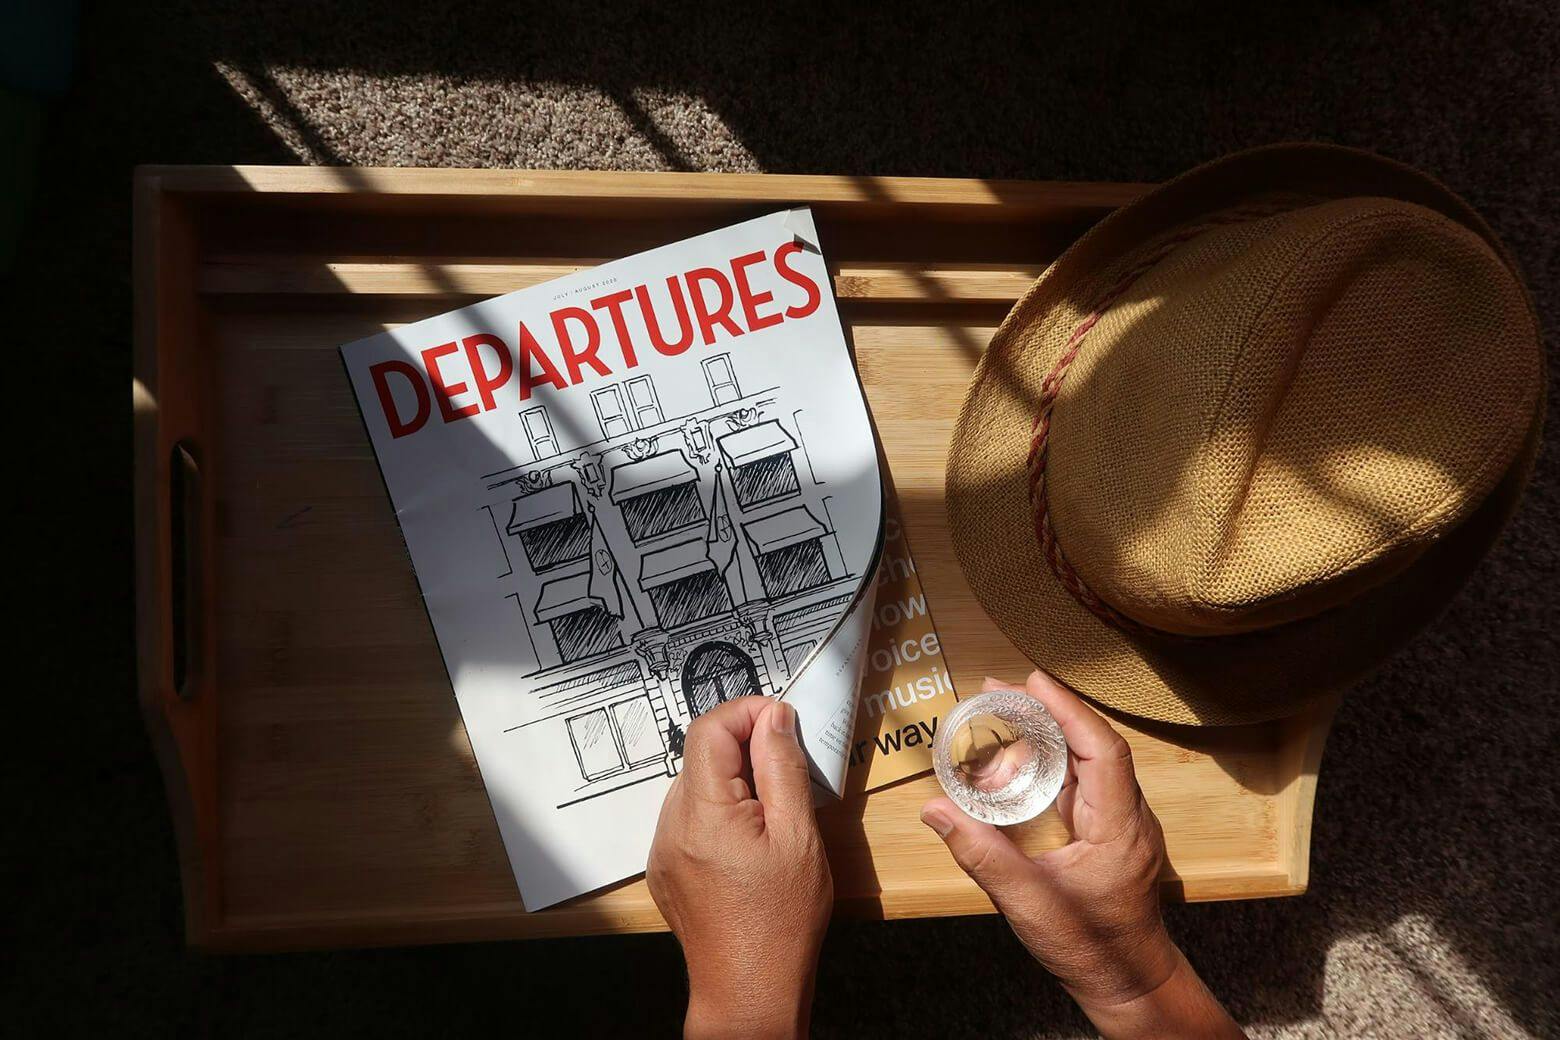 A magazine titled “Departures.”